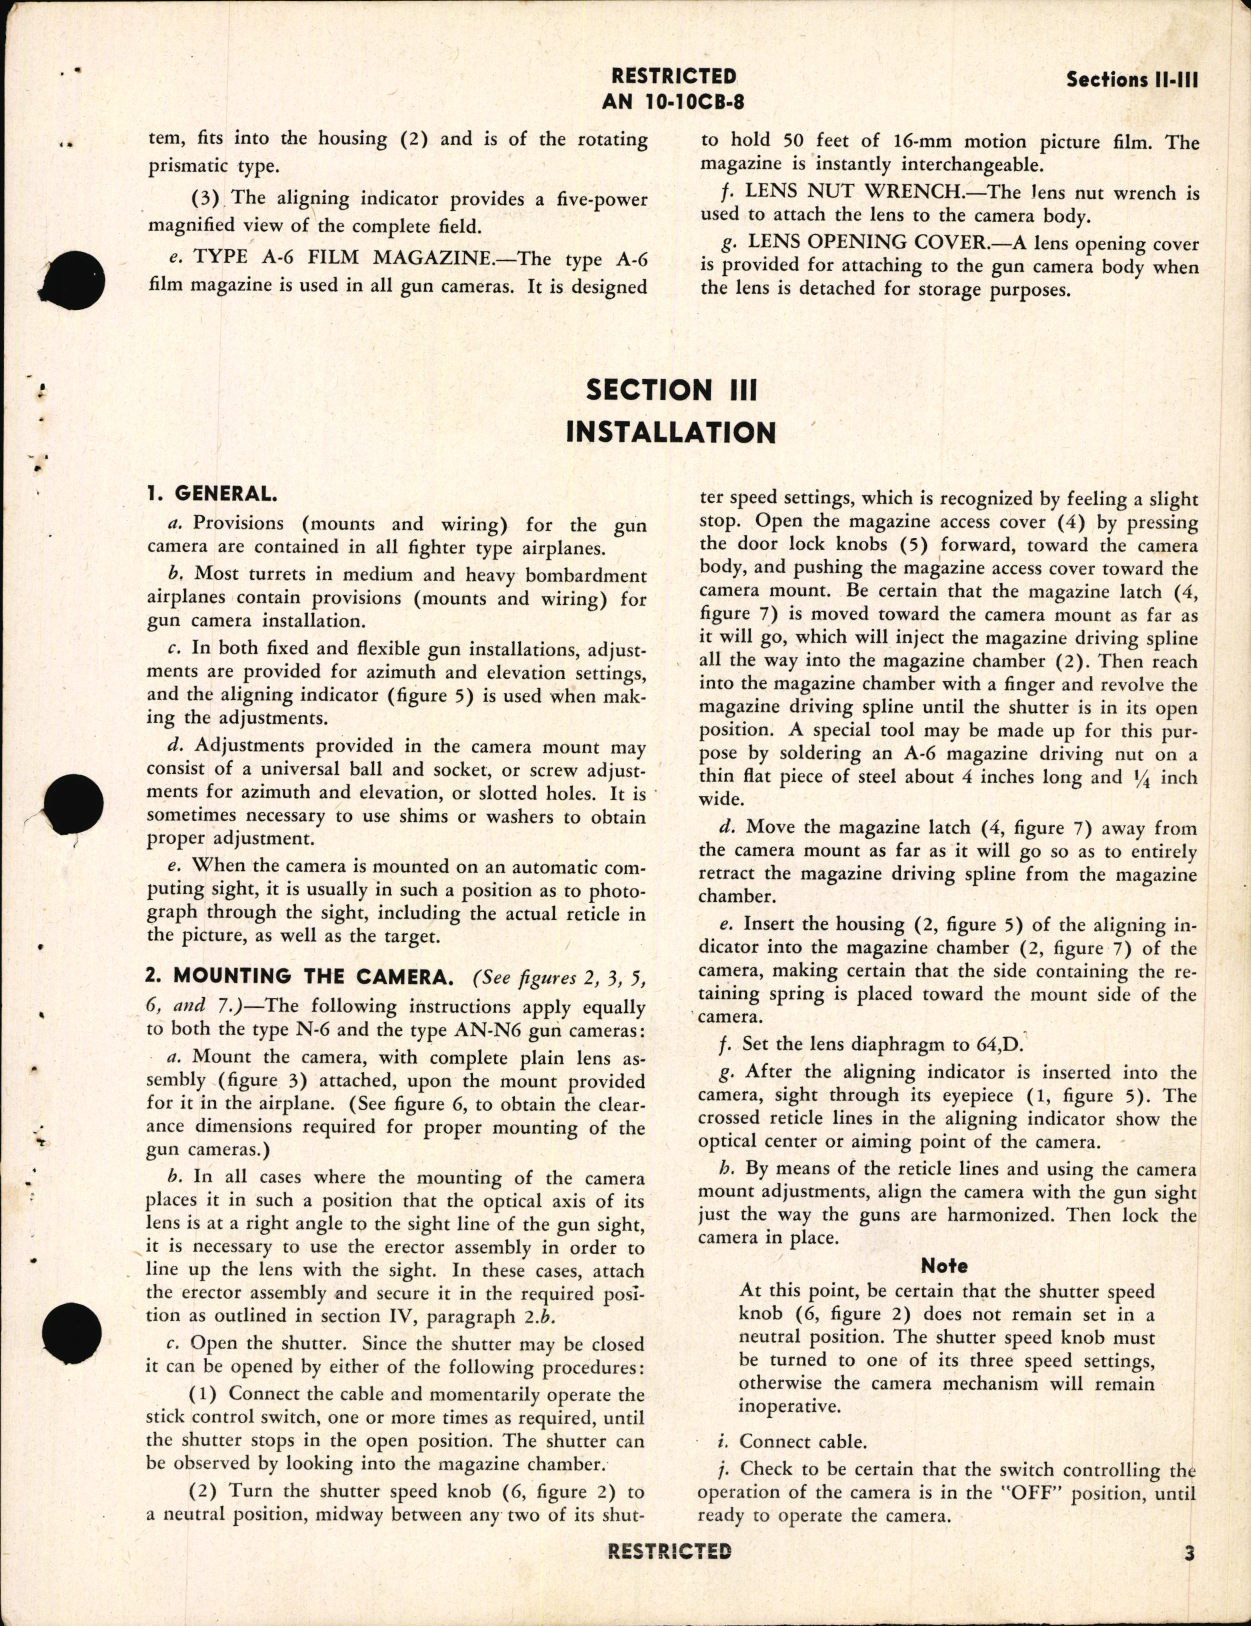 Sample page 7 from AirCorps Library document: Handbook of Instructions with Parts Catalog for N-6 and AN-N6 Gun Cameras